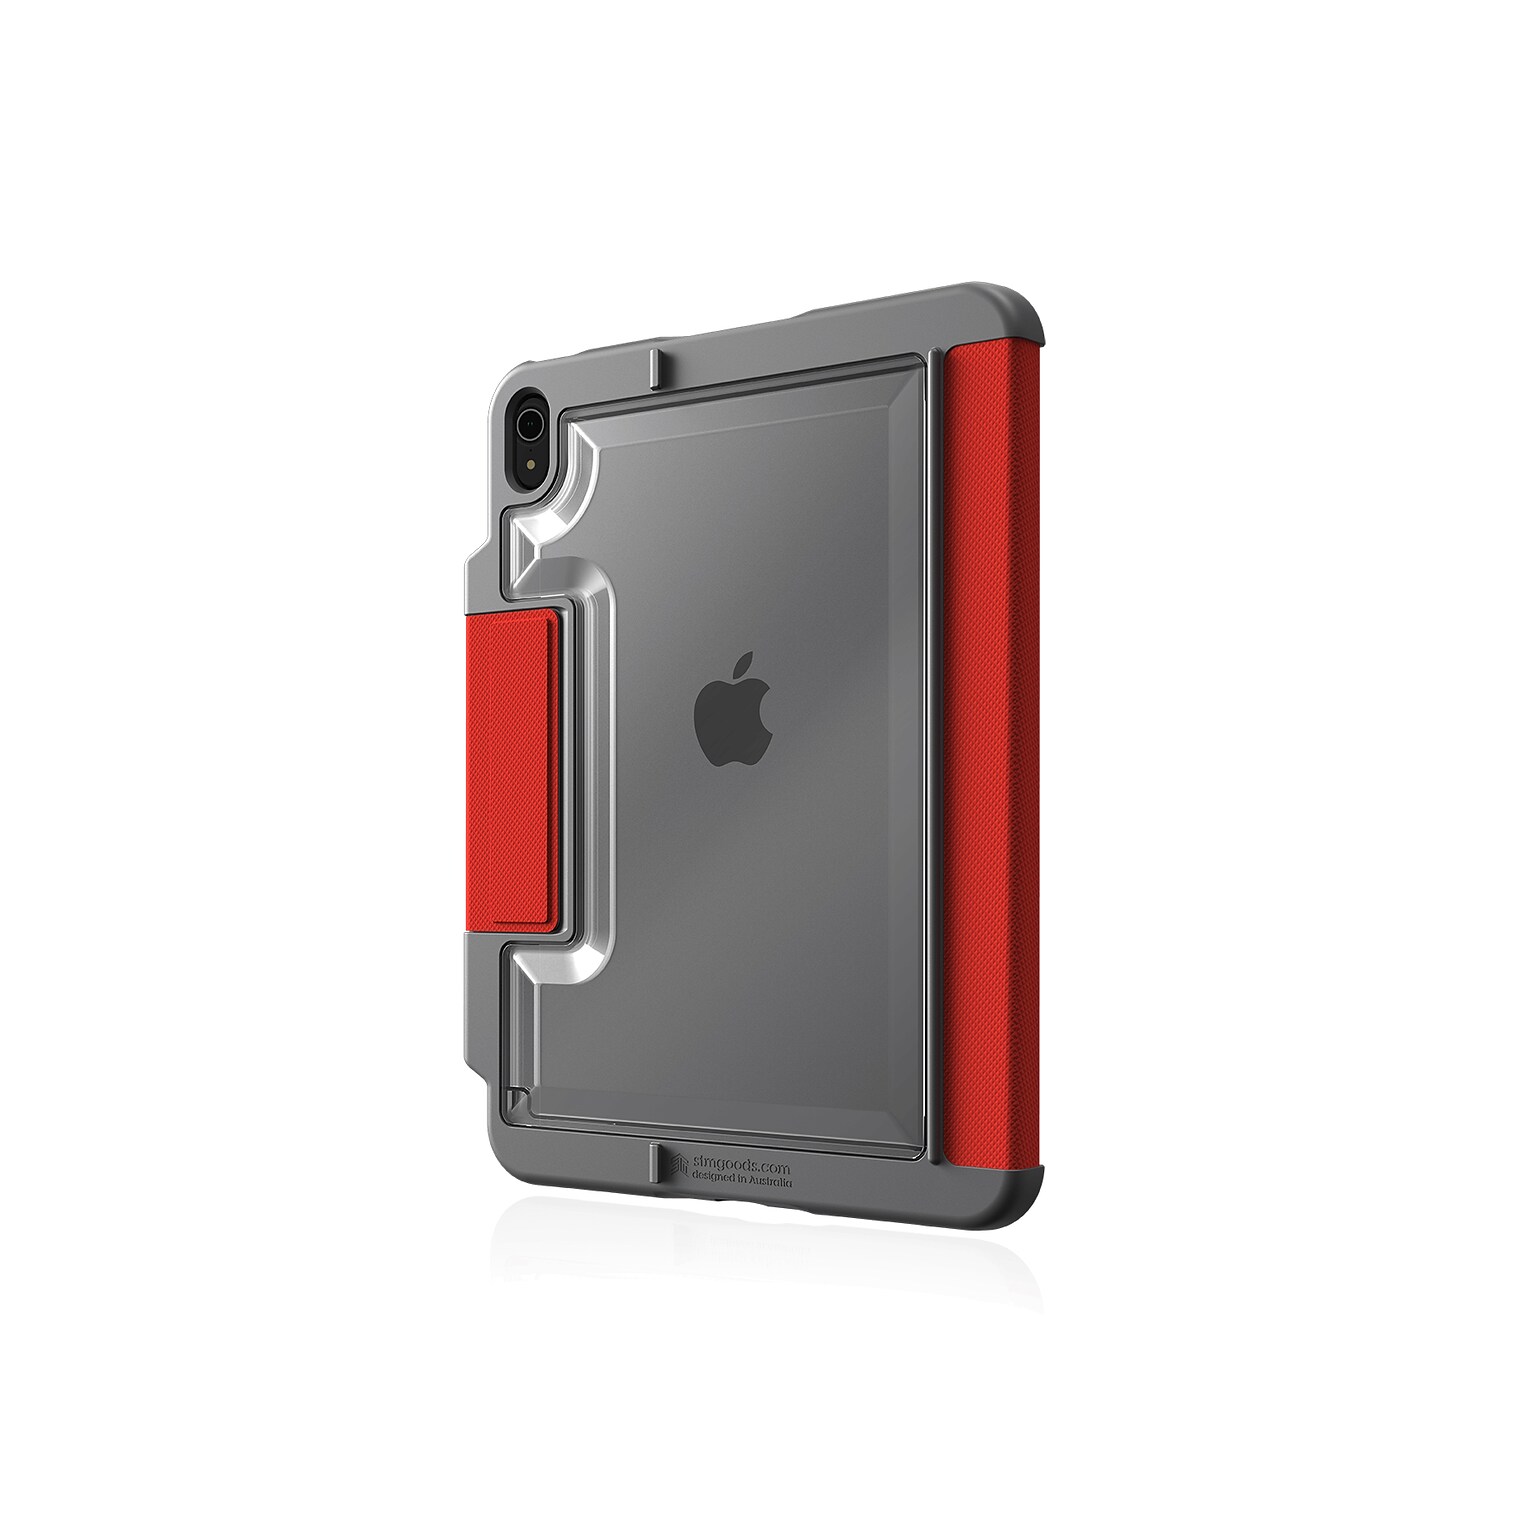 STM Dux Plus TPU 10.9 Protective Case for iPad 10th Generation, Red (STM-222-387KX-02)